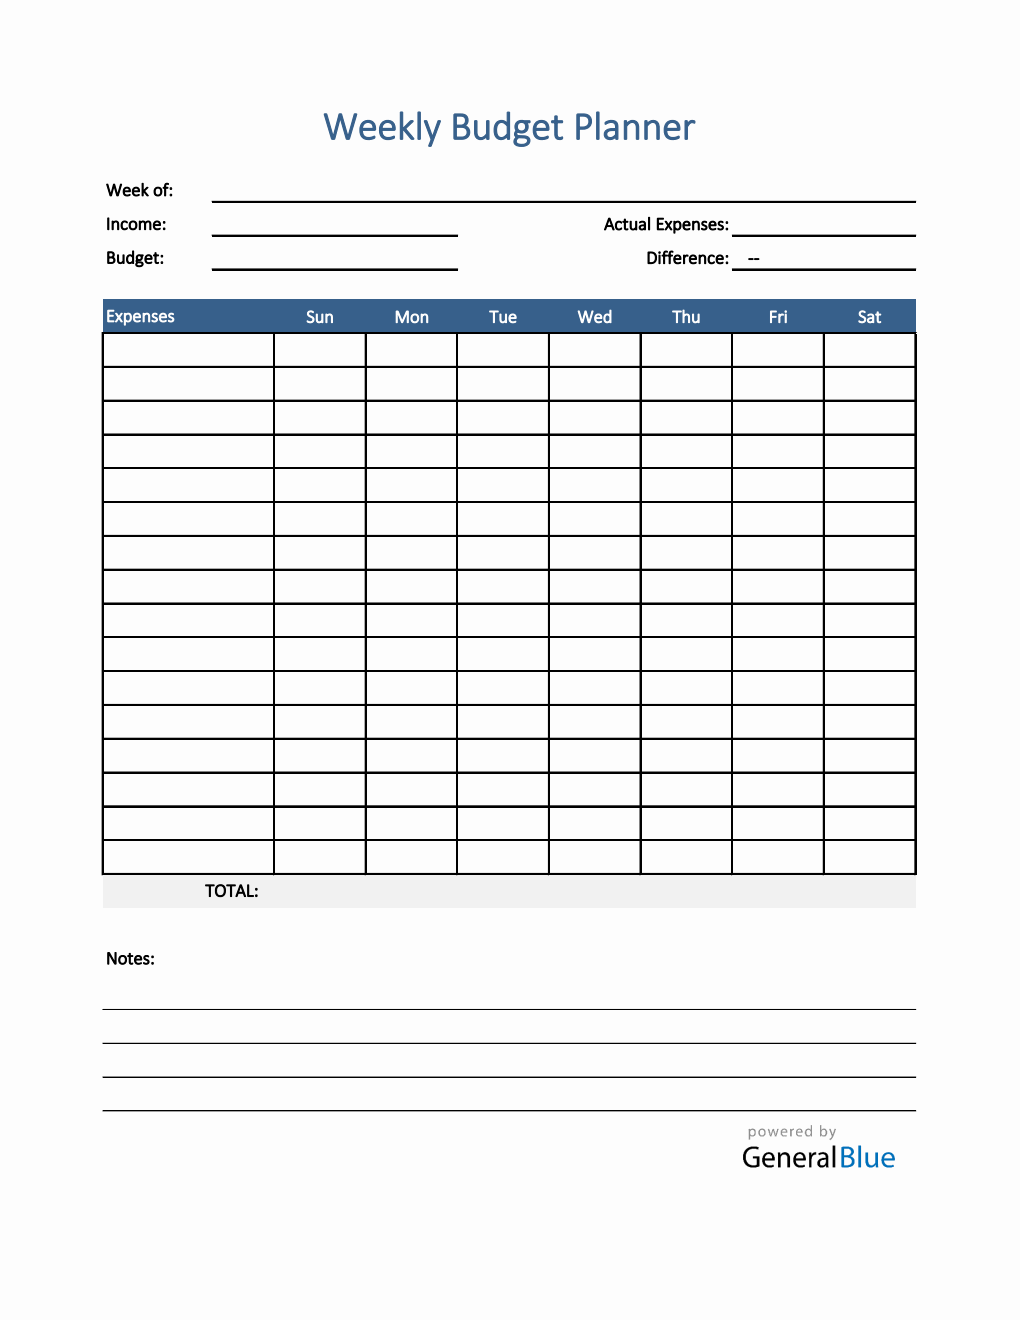 Bi Weekly Budget Planner Template, Paycheck Budget Printable